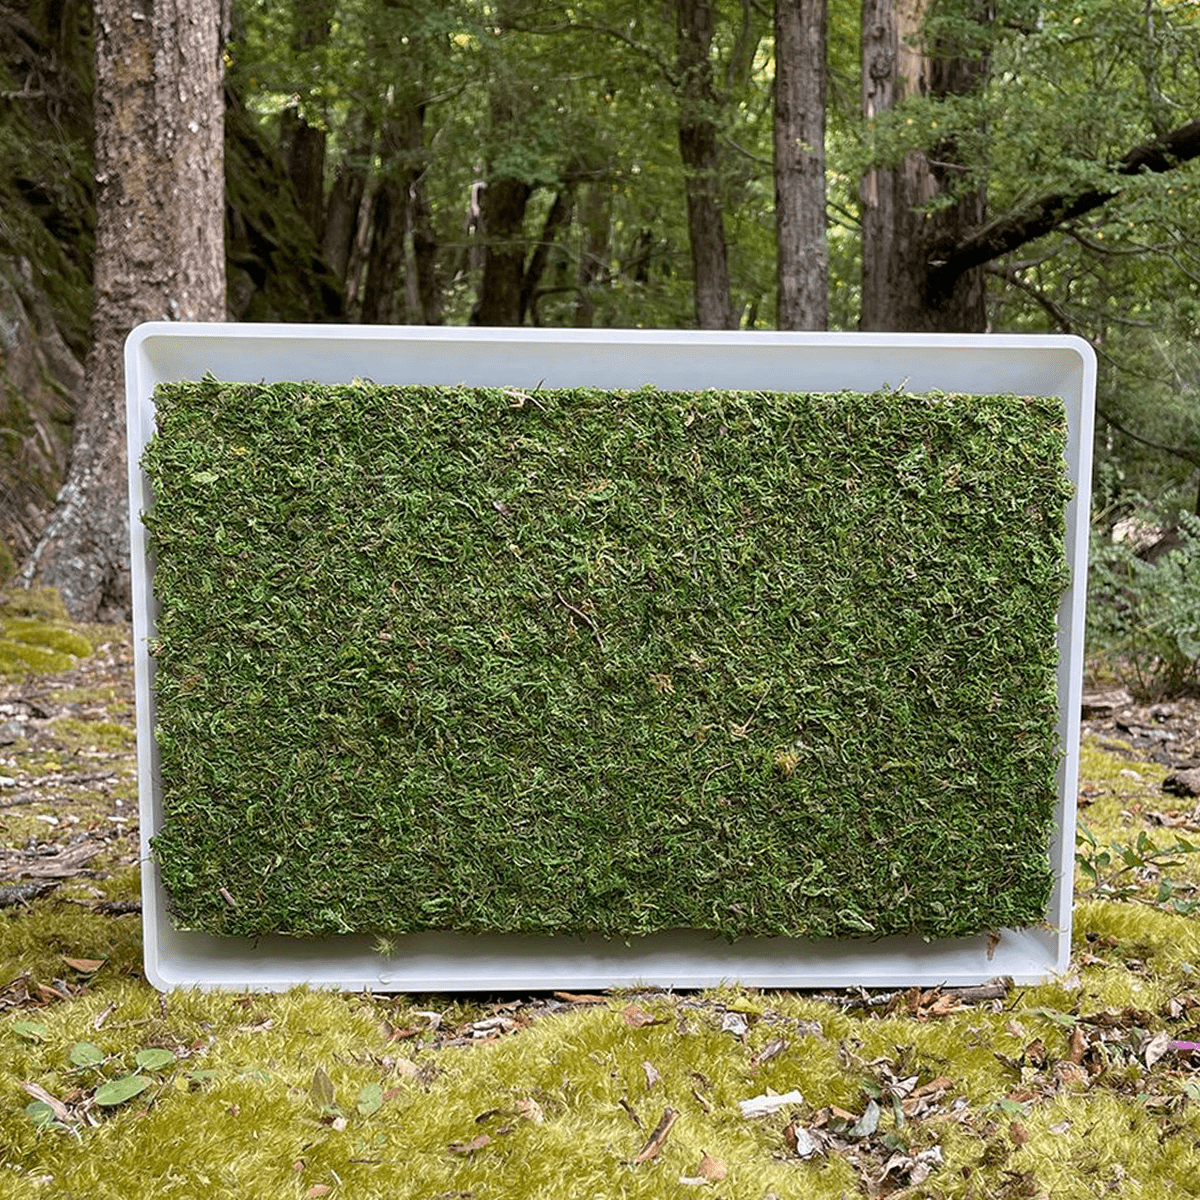 Want an Air Conditioner Covered in Moss?